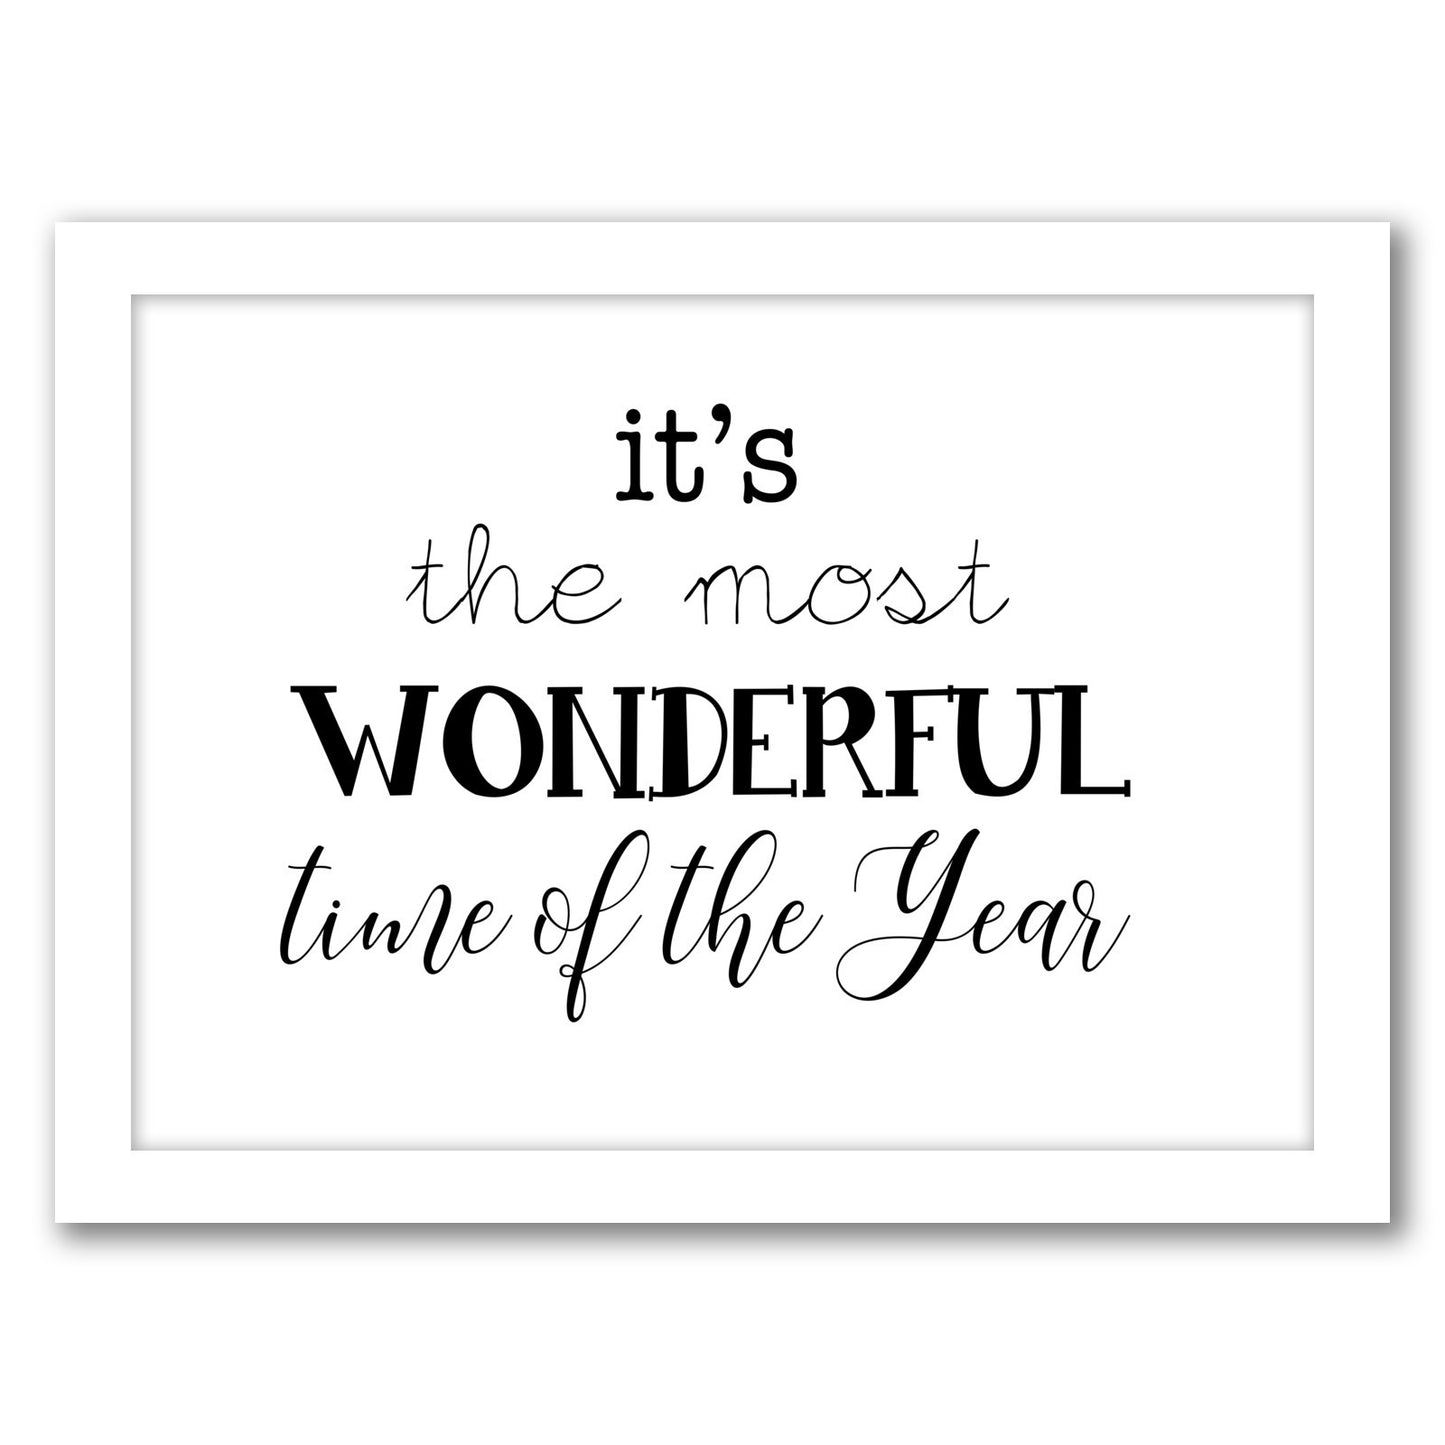 ItS The Most Wonderful Time Of The Year by Tanya Shumkina - White Framed Print - Wall Art - Americanflat